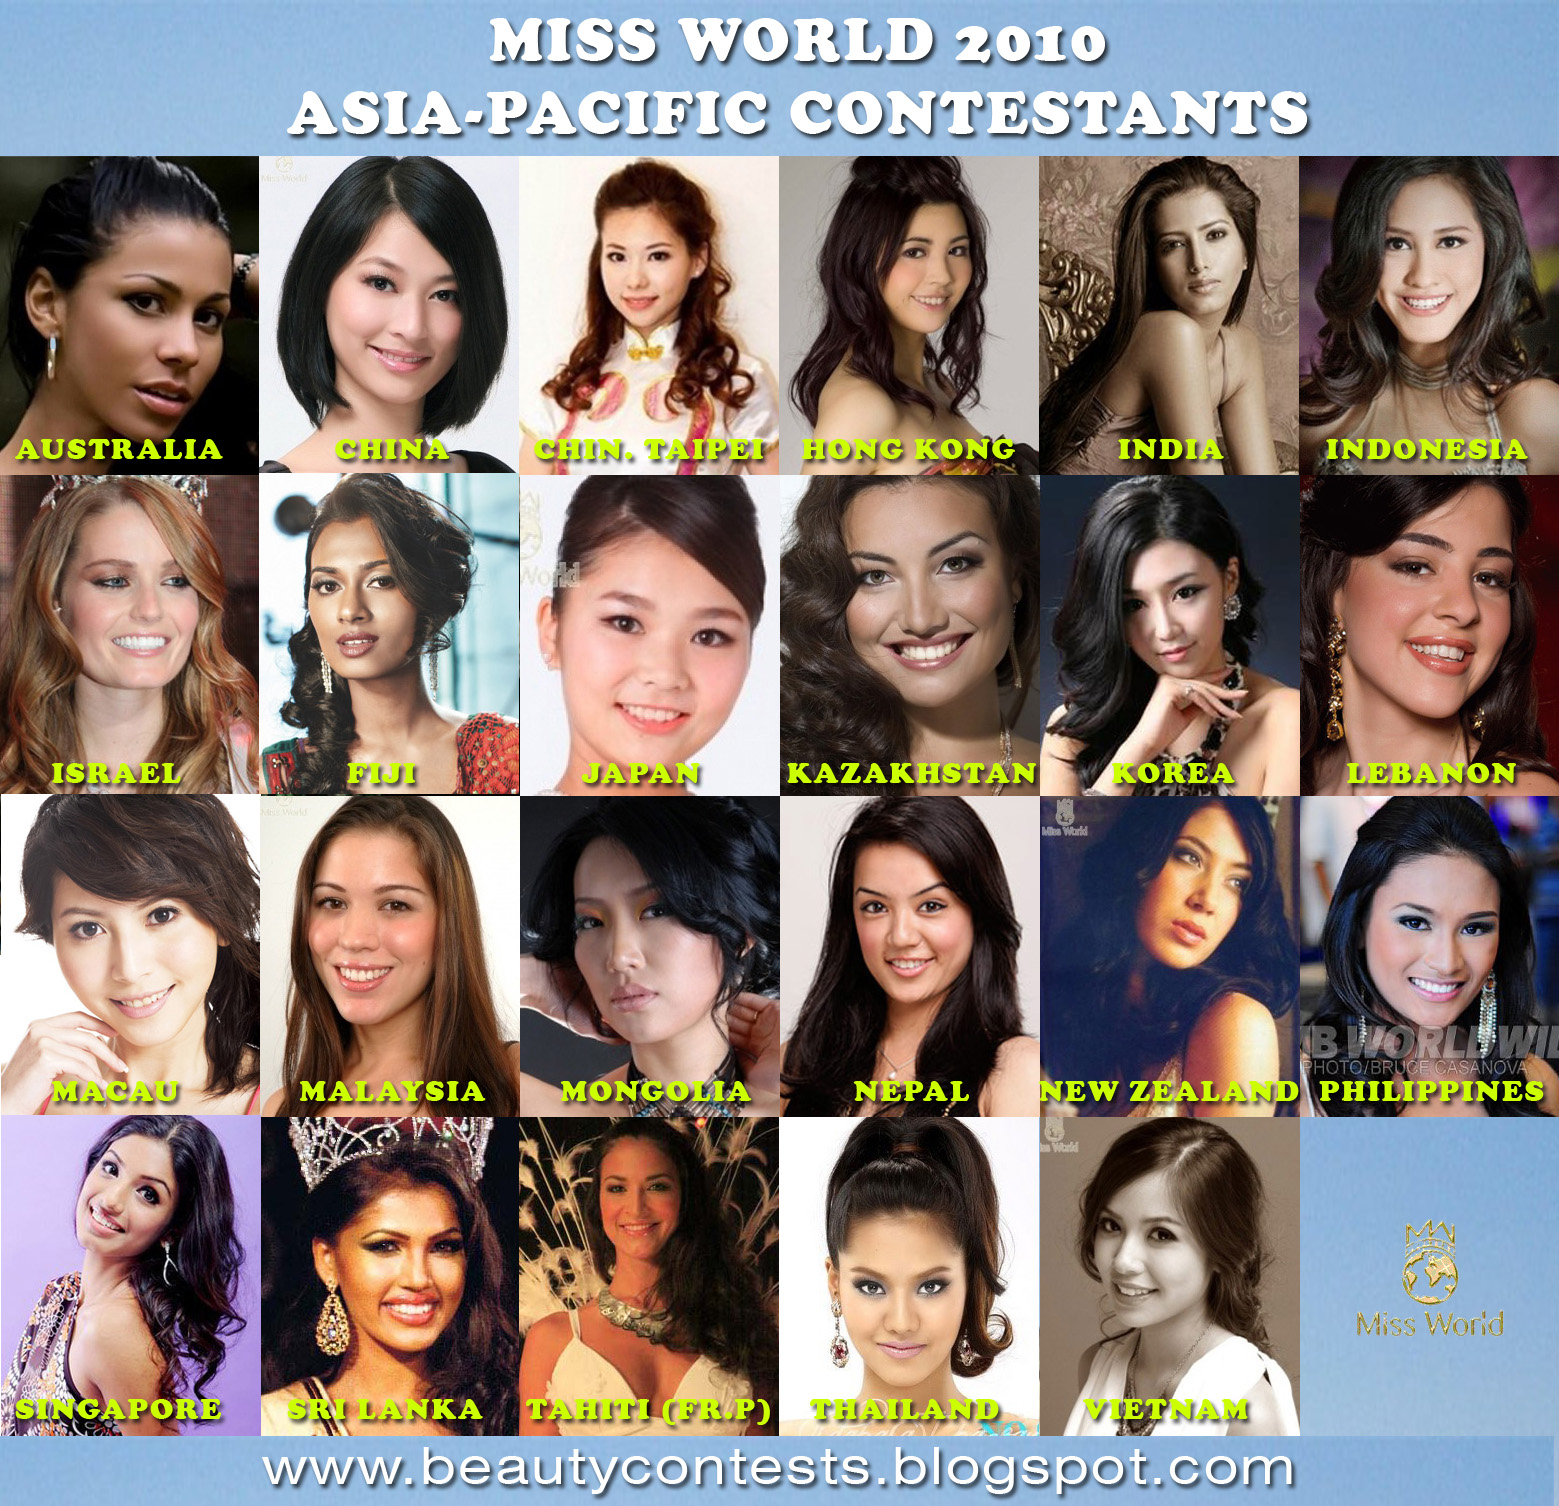 MISS WORLD 2010 - ASIA/PACIFIC CONTESTANTS | Miss World